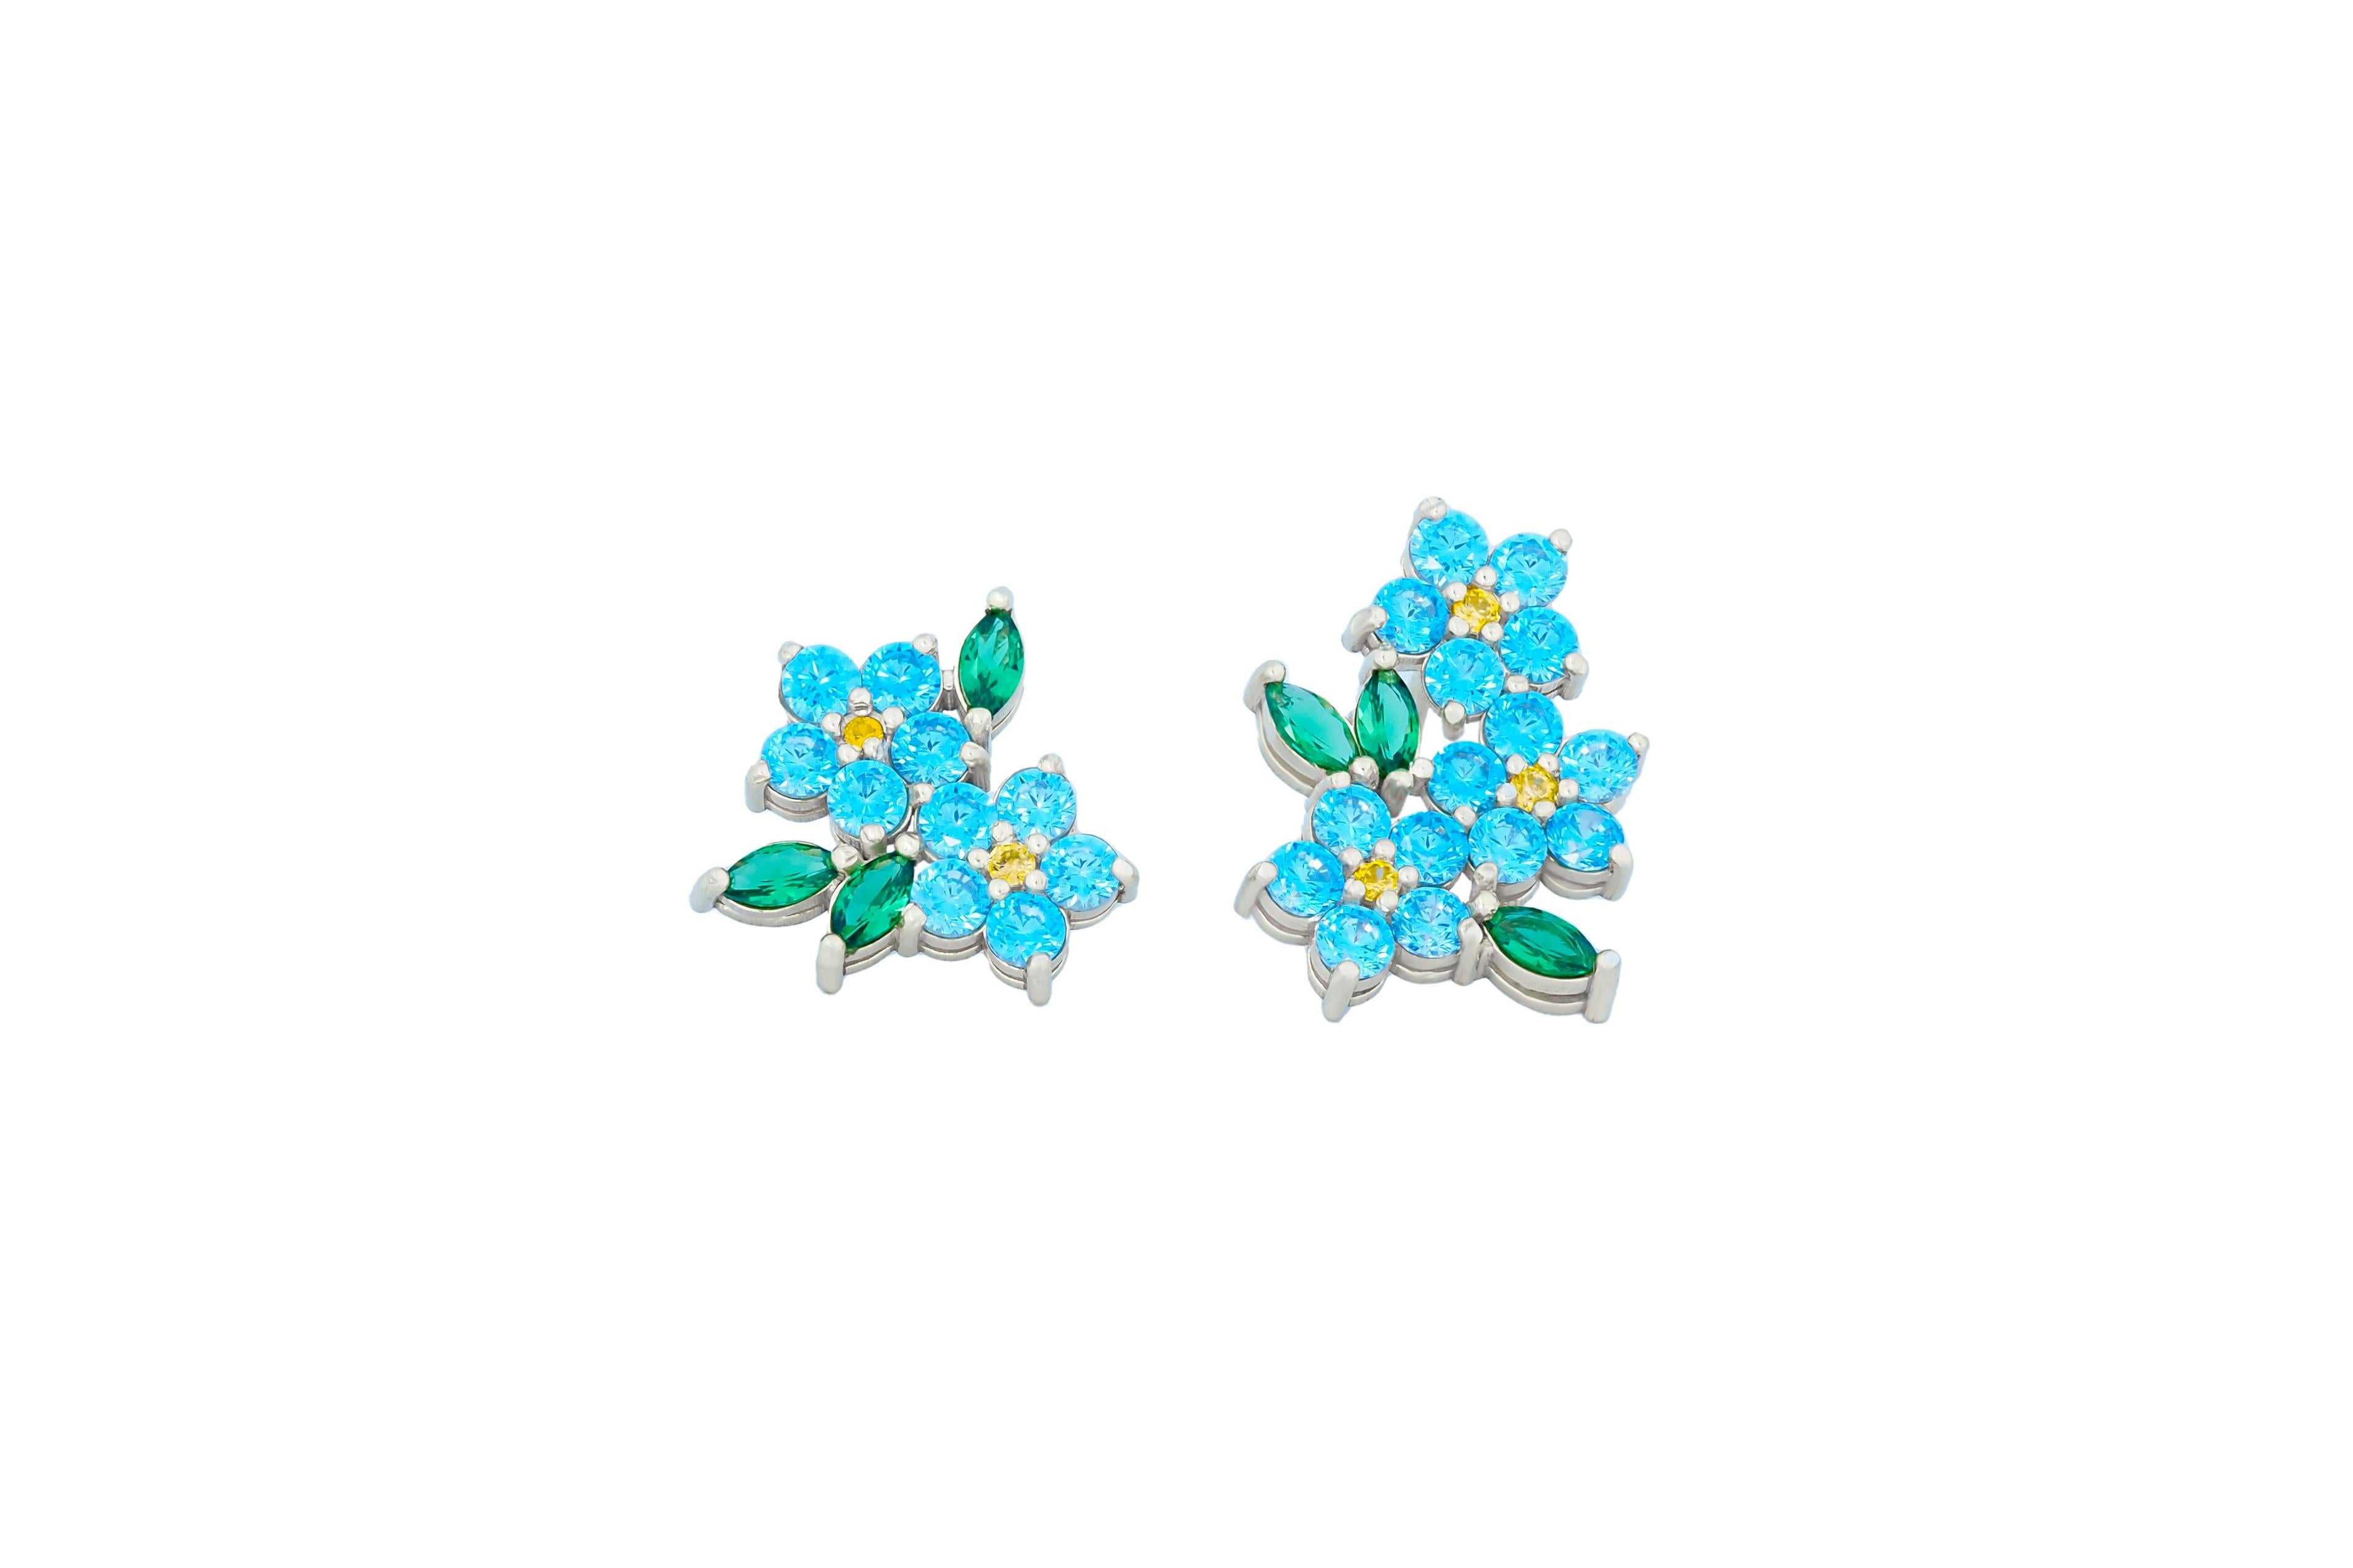 Modern Mismatched flower earrings with colored gemstones in 14k gold. For Sale